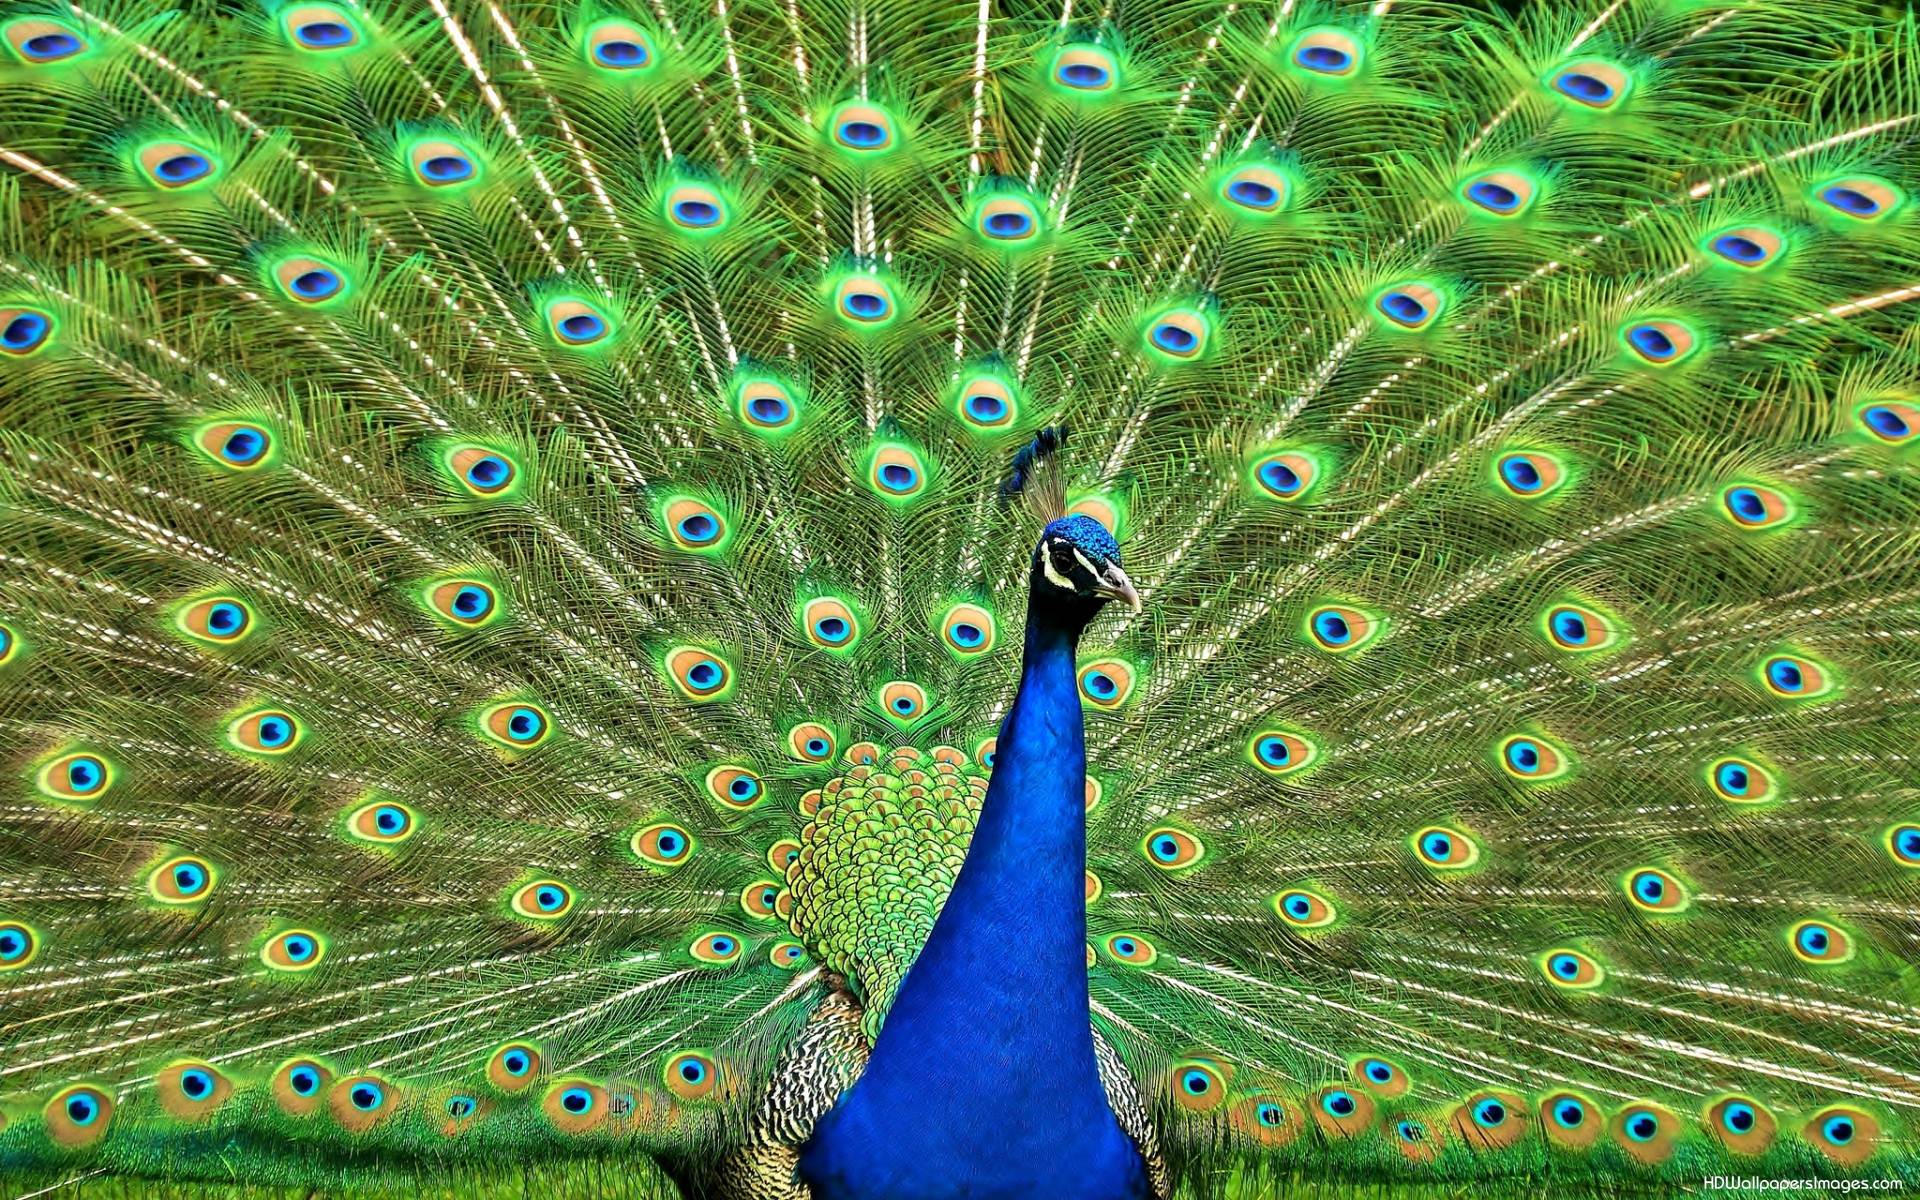 Wallpapers Of Peacock Feathers Hd 2015 Wallpaper Cave HD Wallpapers Download Free Images Wallpaper [wallpaper981.blogspot.com]